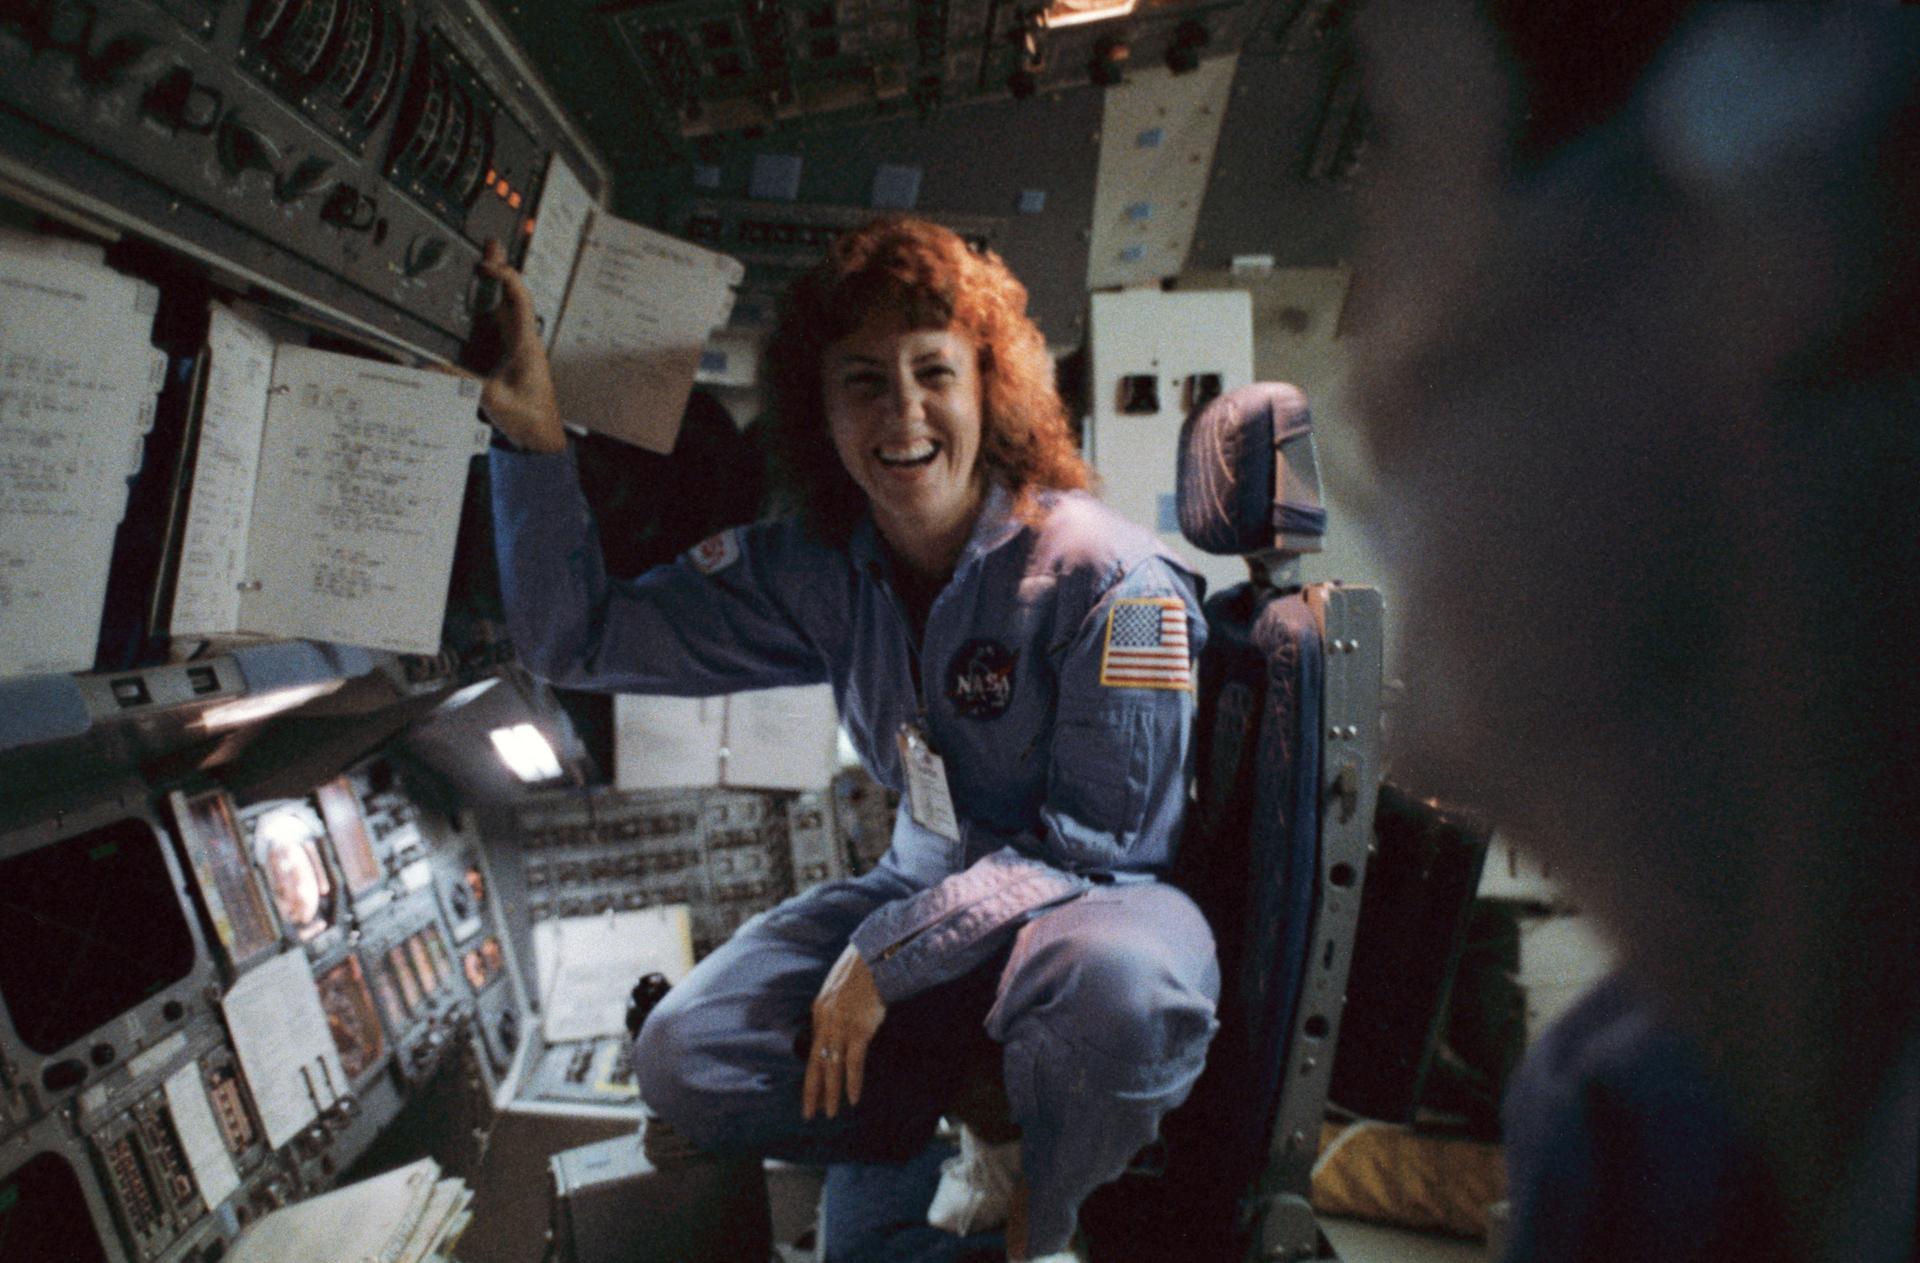 Christa McAuliffe training in the space shuttle simulator for the STS-51L mission. She would have been the first elementary teacher in space. Her backup for this mission, Barbara Morgan, later became an astronaut and flew into space on the STS-118 mission in 2007. (Source: NASA)